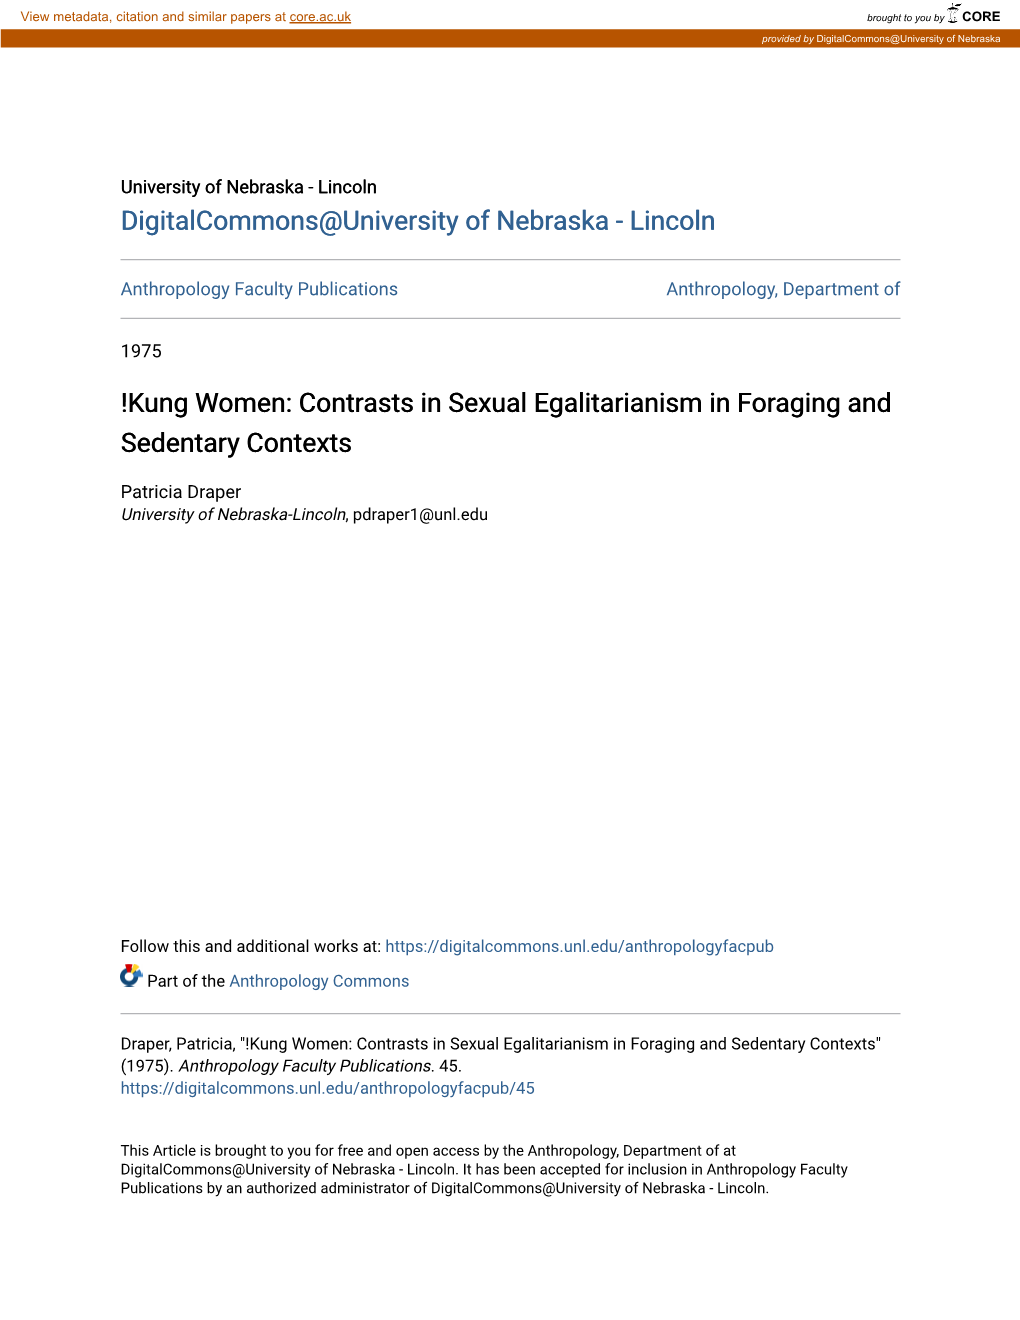 Kung Women: Contrasts in Sexual Egalitarianism in Foraging and Sedentary Contexts